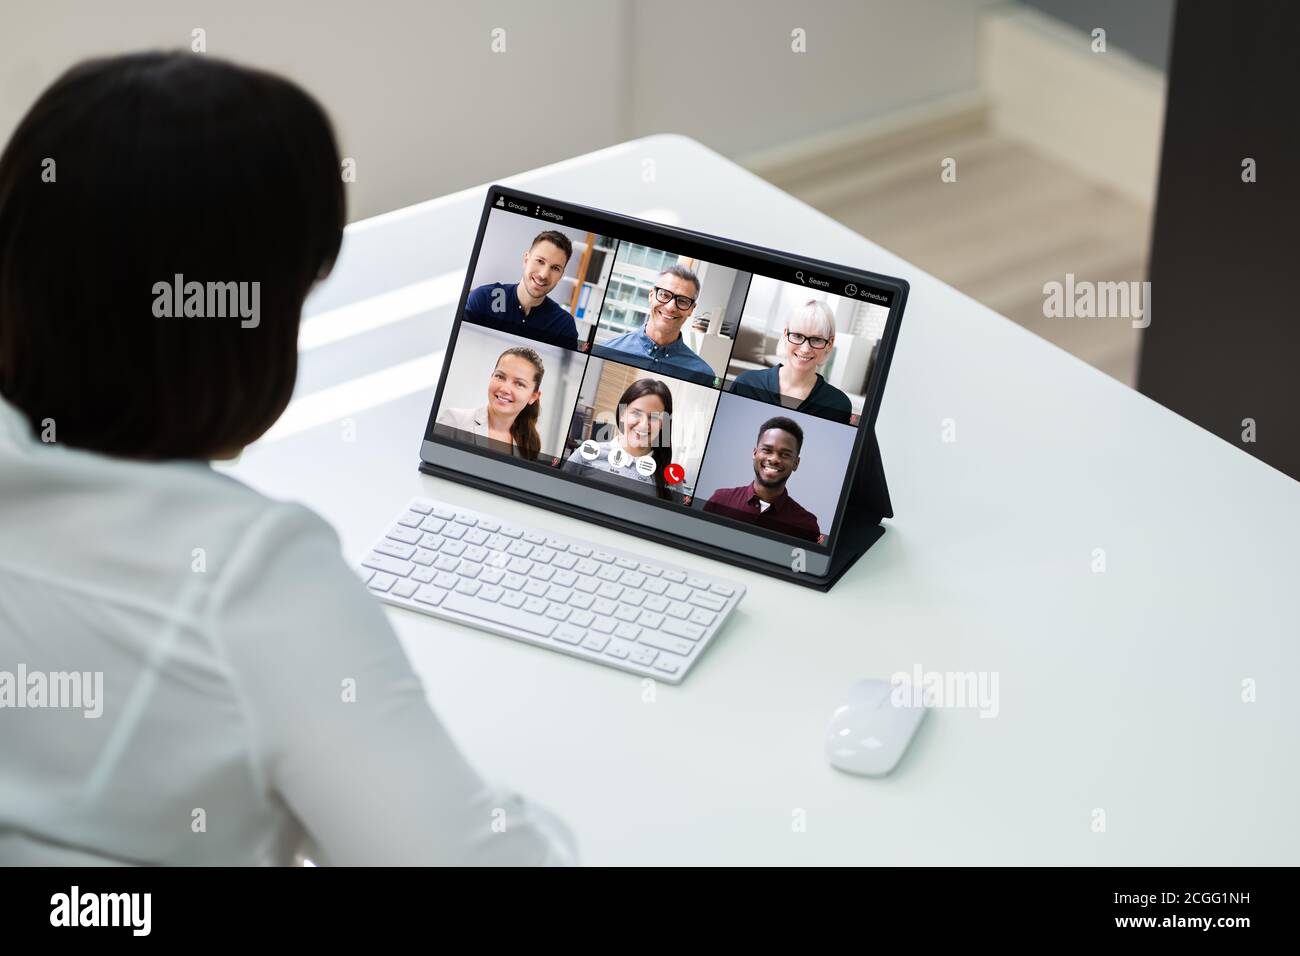 Online Video Conference Or Business Interview On Tablet Stock Photo